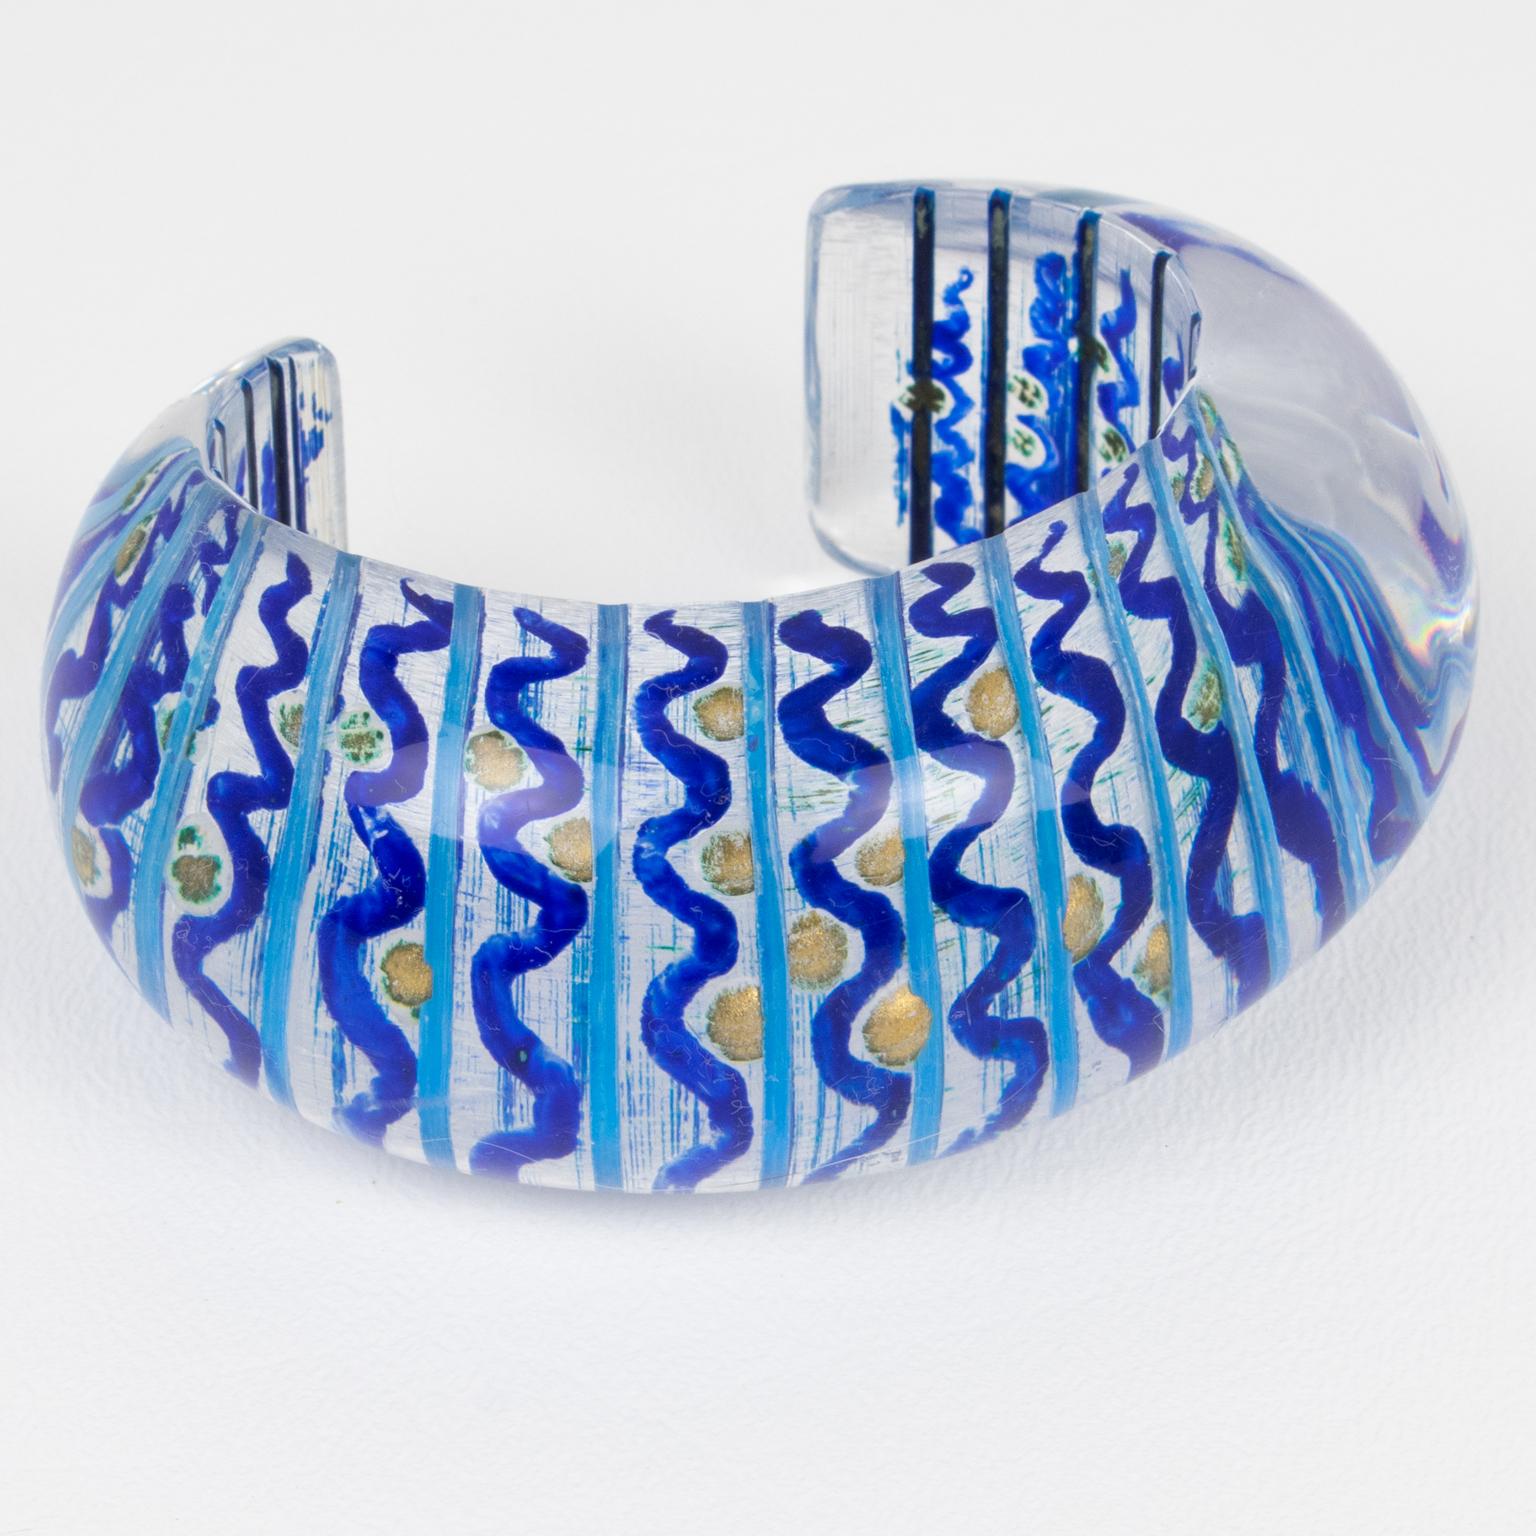 Modern Christophe Gallard Massive Lucite Cuff Bracelet with Blue and Gold Decor For Sale